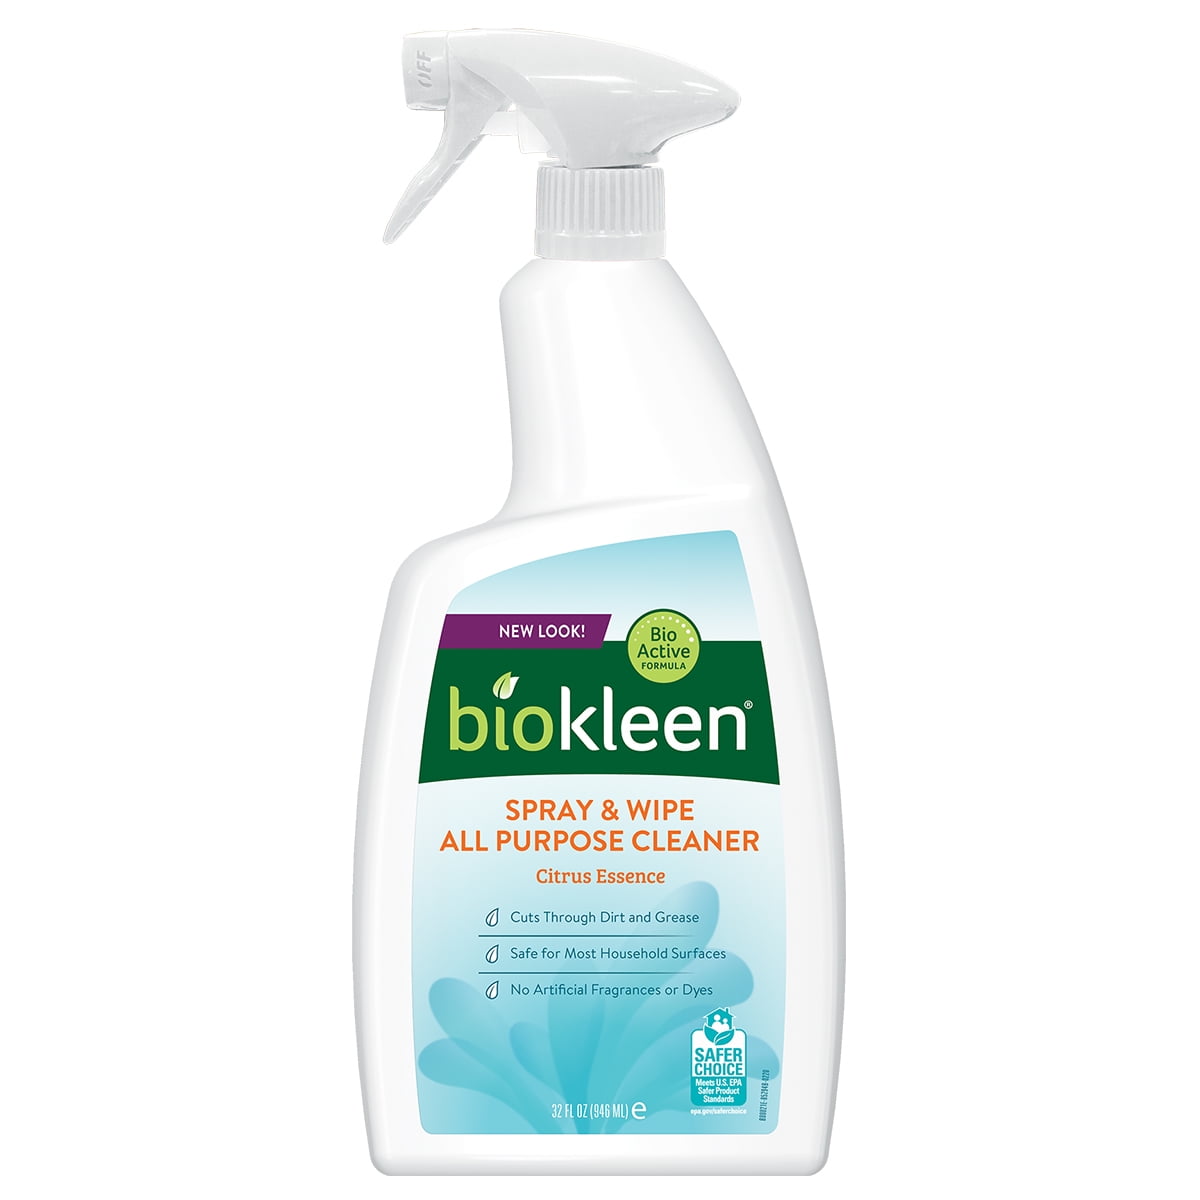 3-pk Biokleen Bac-Out Stain Odor Remover 32oz Eco-Friendly Non-Toxic Plant  Based